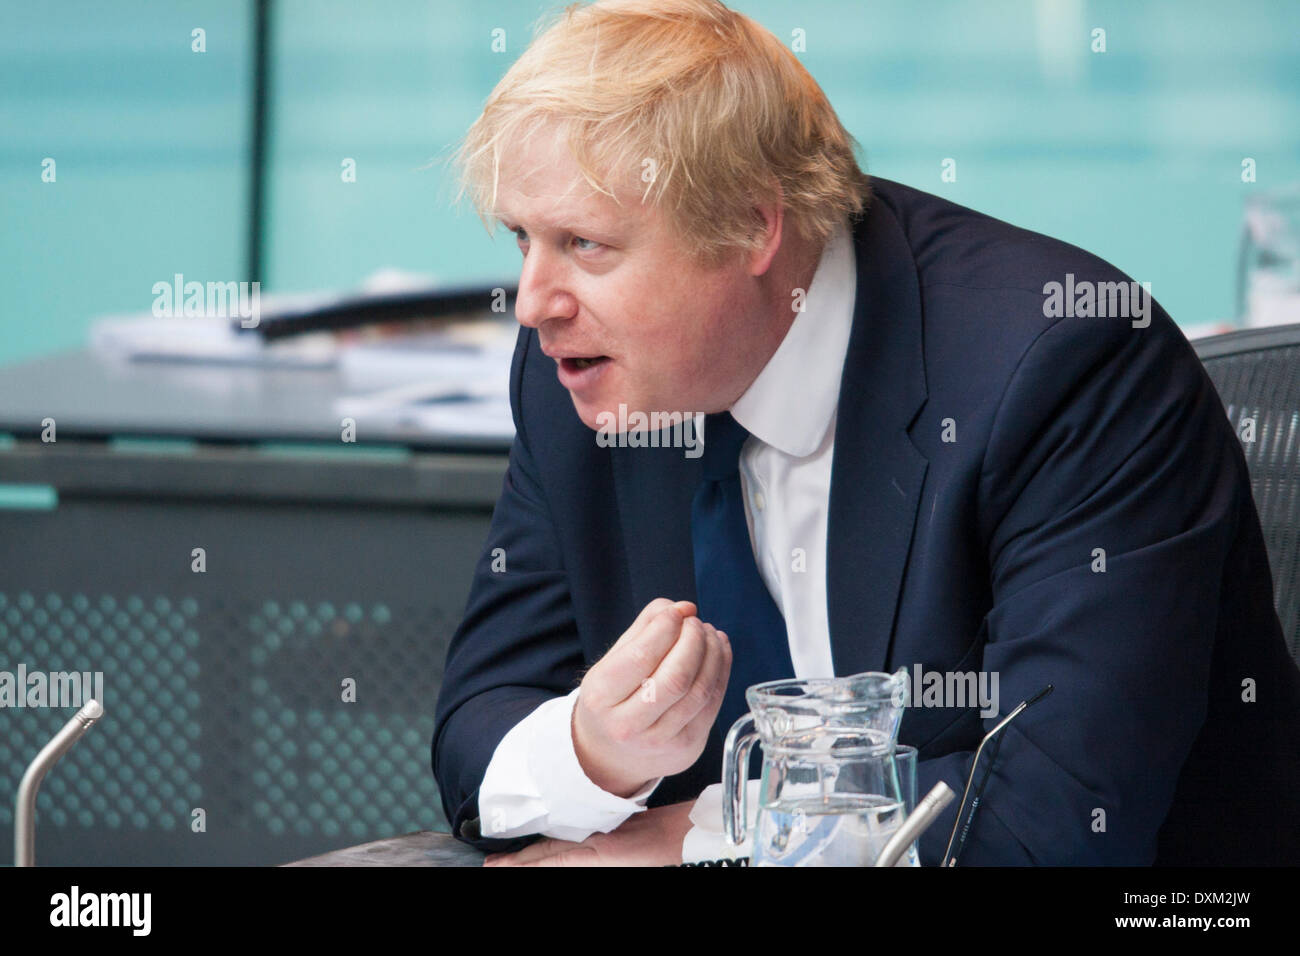 London, March 27th 2014. Mayor of London Boris Johnson speaks as the Police and Crime Committee of the London Assembly question him on undercover policing and the governance of the Metropolitan Police. Credit:  Paul Davey/Alamy Live News Stock Photo